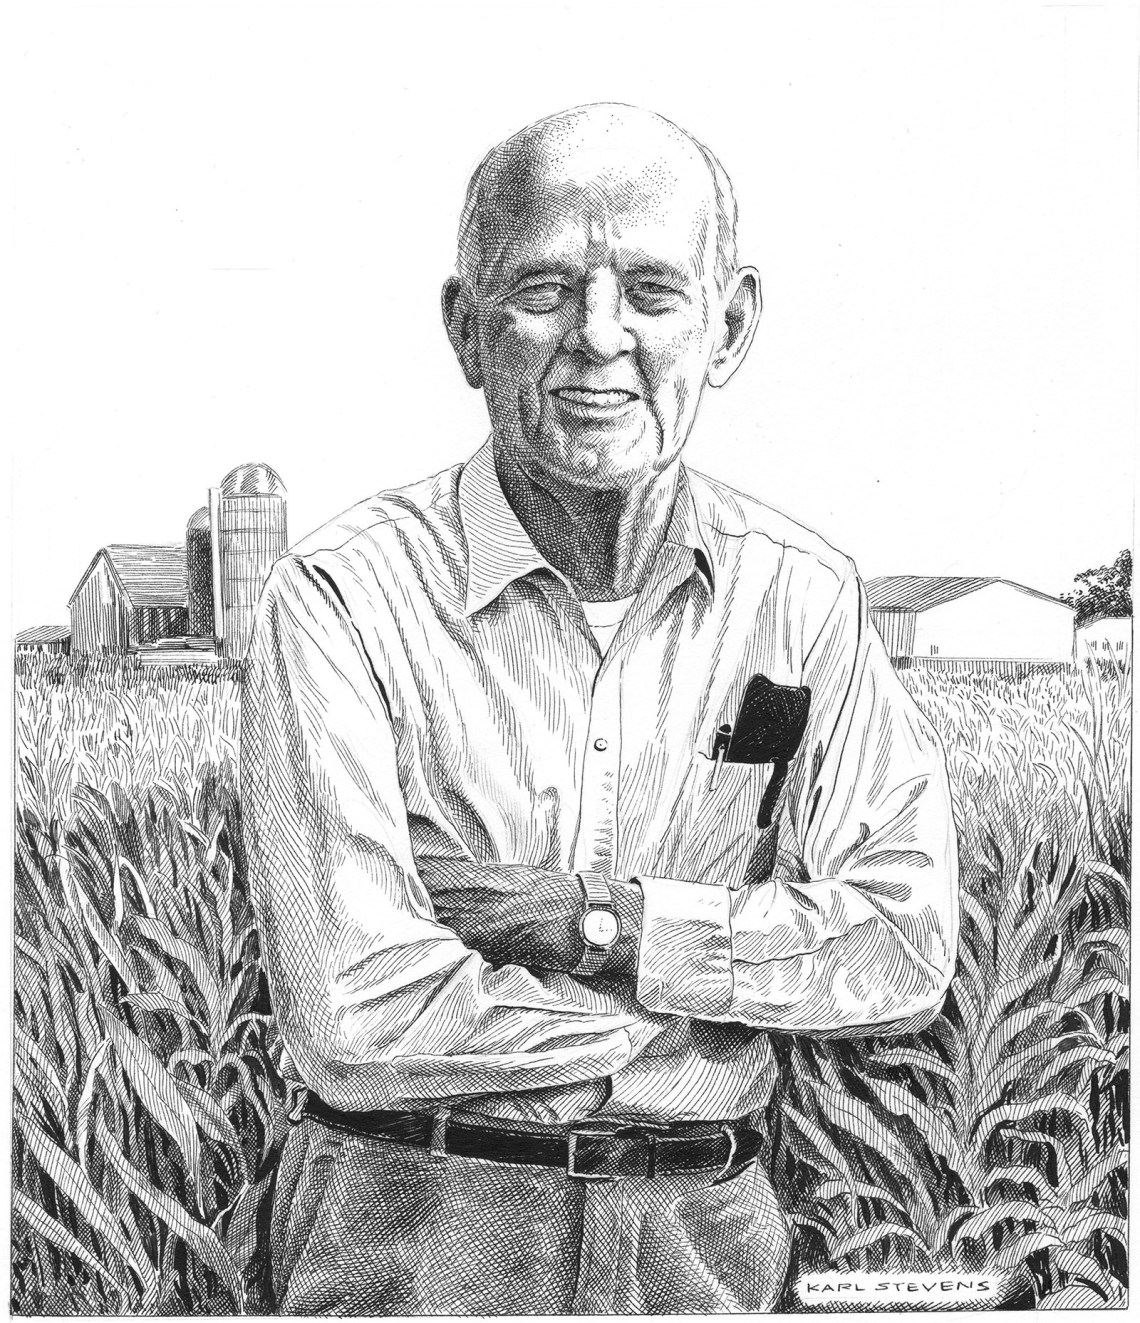 Wendell Berry’s High Horse